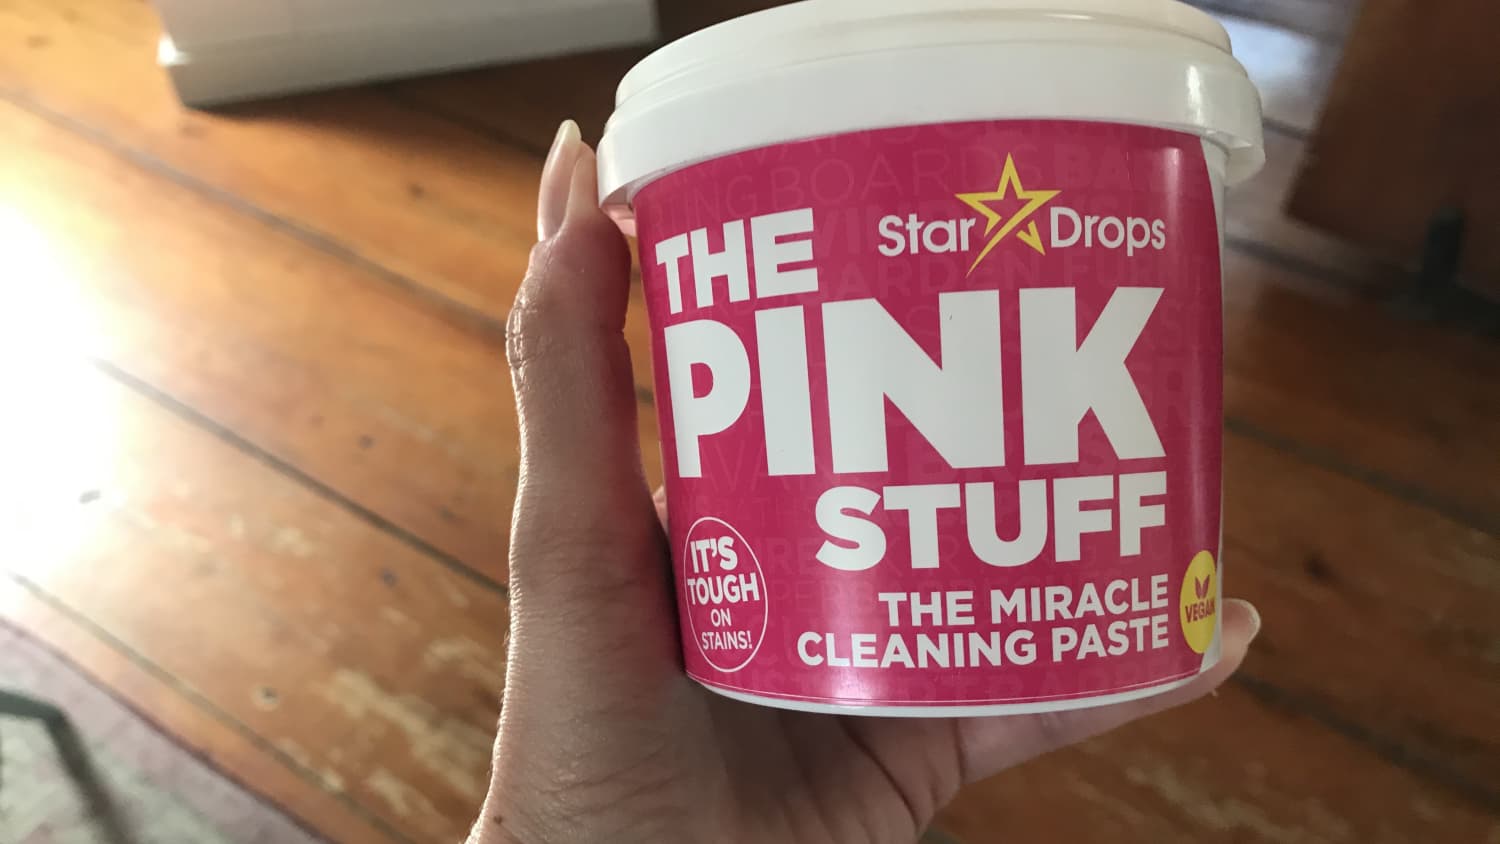 How to Use The Pink Stuff: Pro Tips On This Viral Cleaning Paste